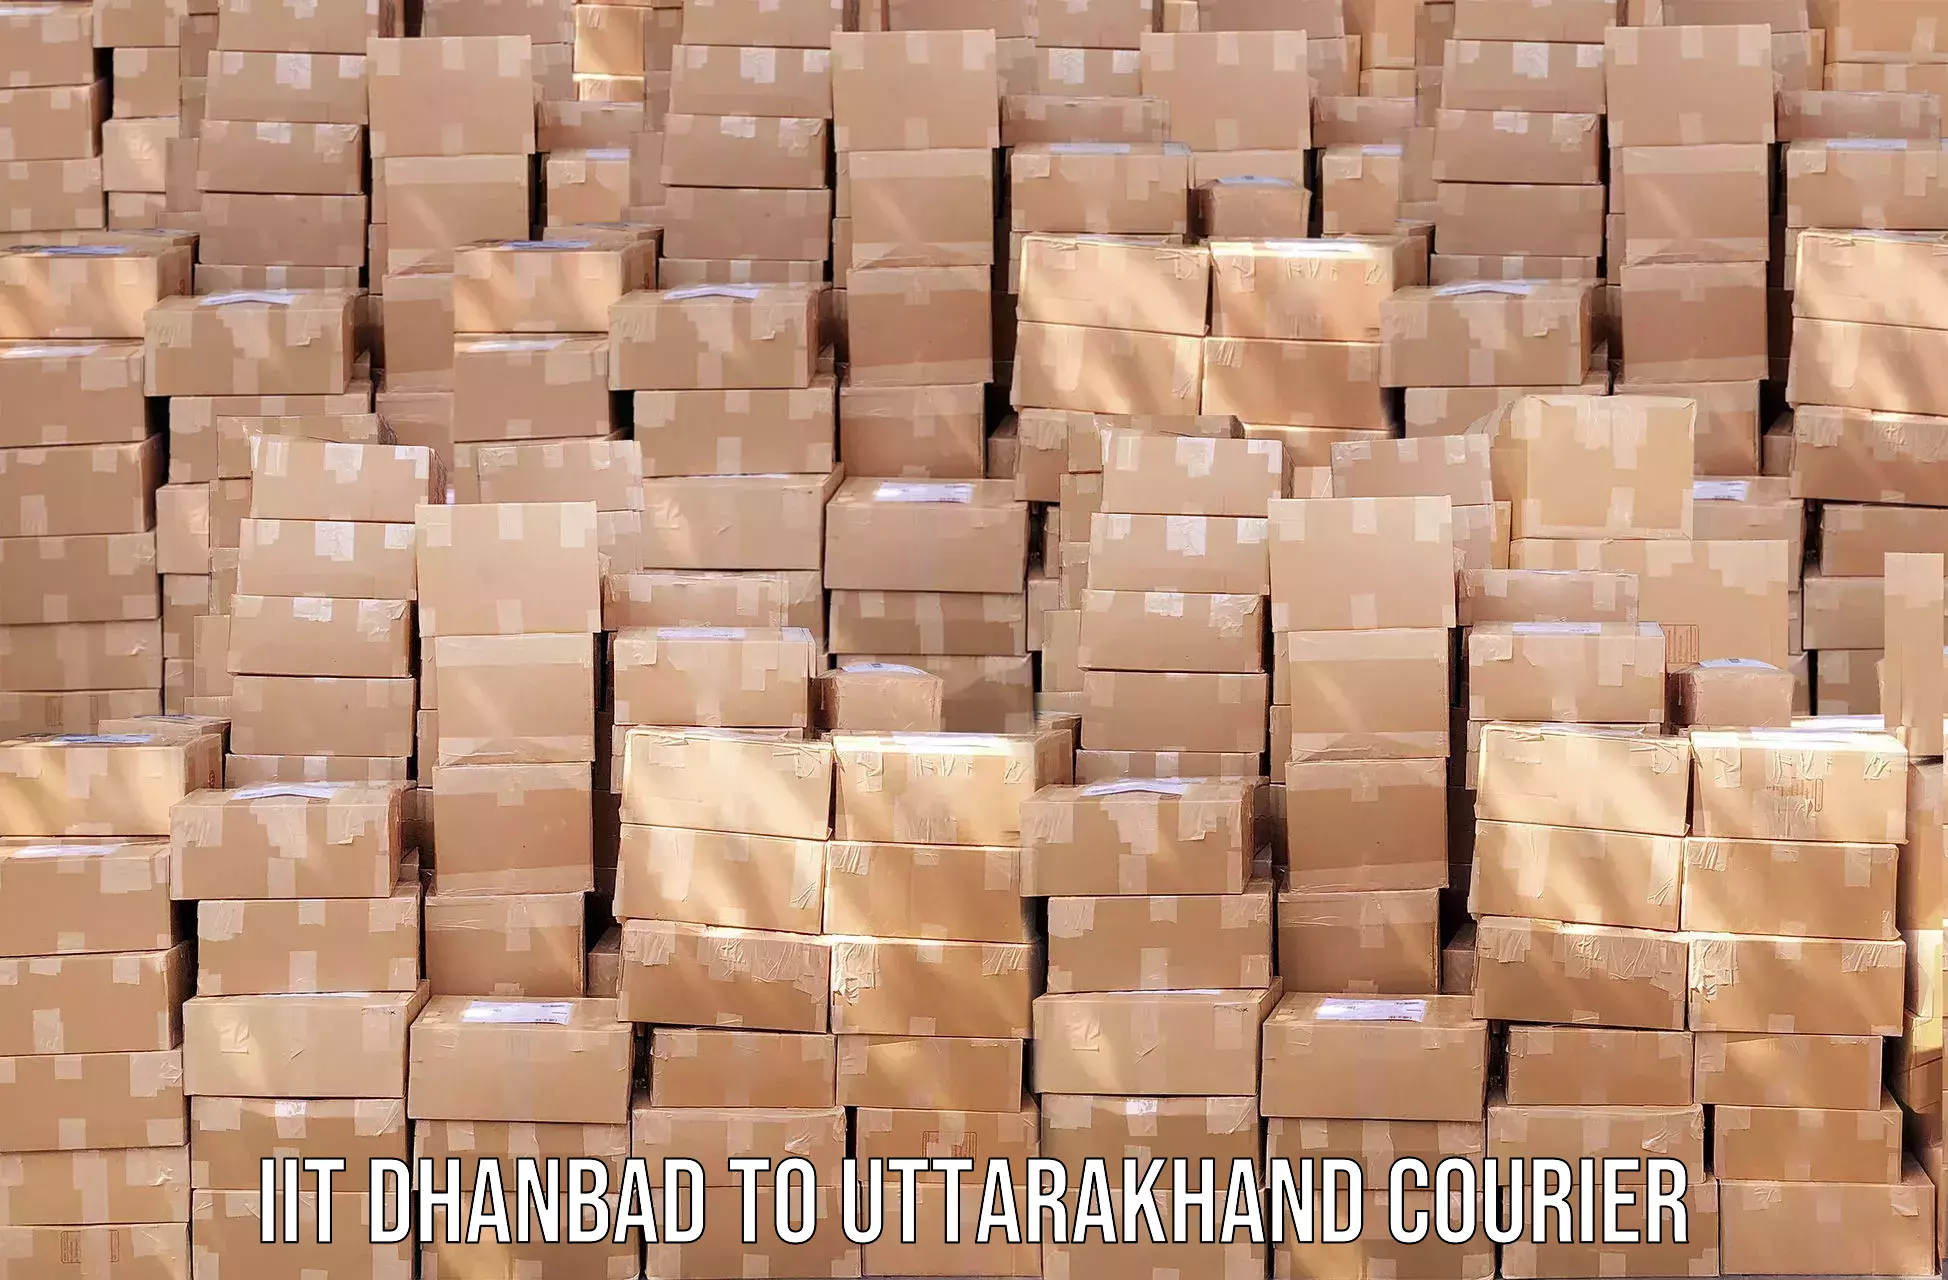 Courier service efficiency IIT Dhanbad to Bhagwanpur